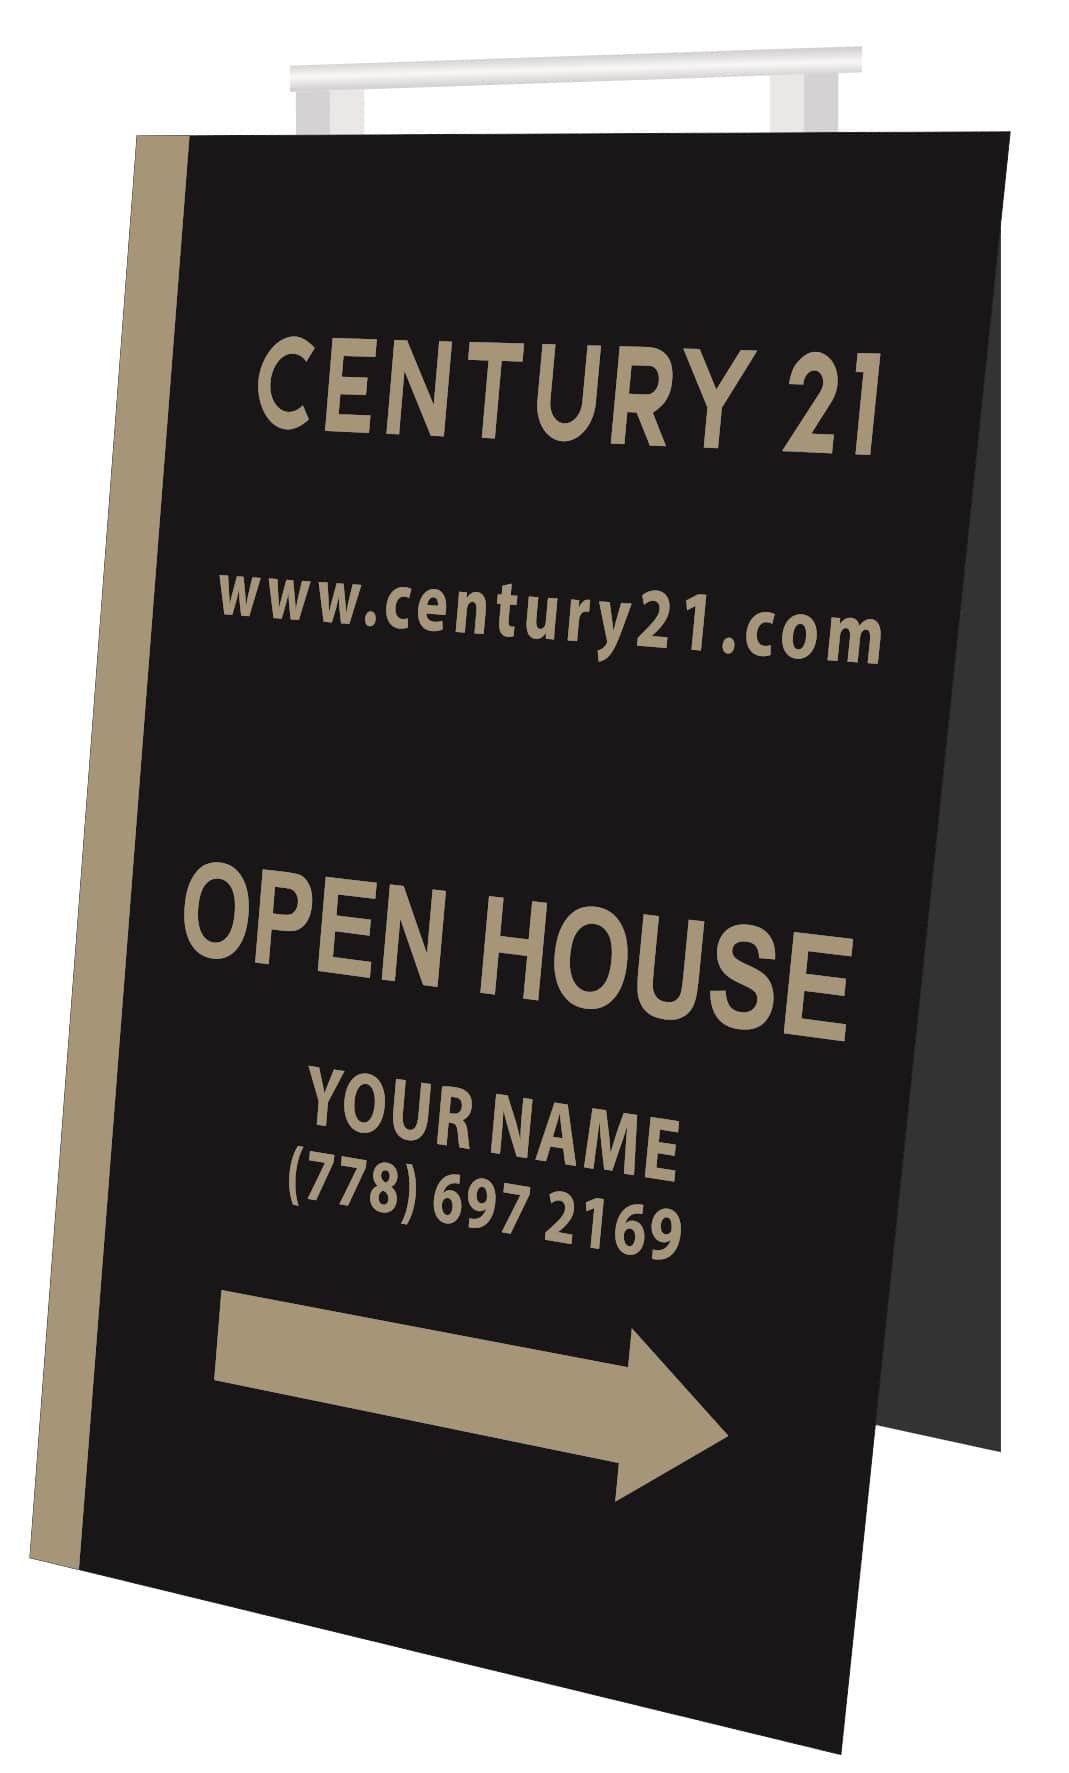 Century 21 open house signs